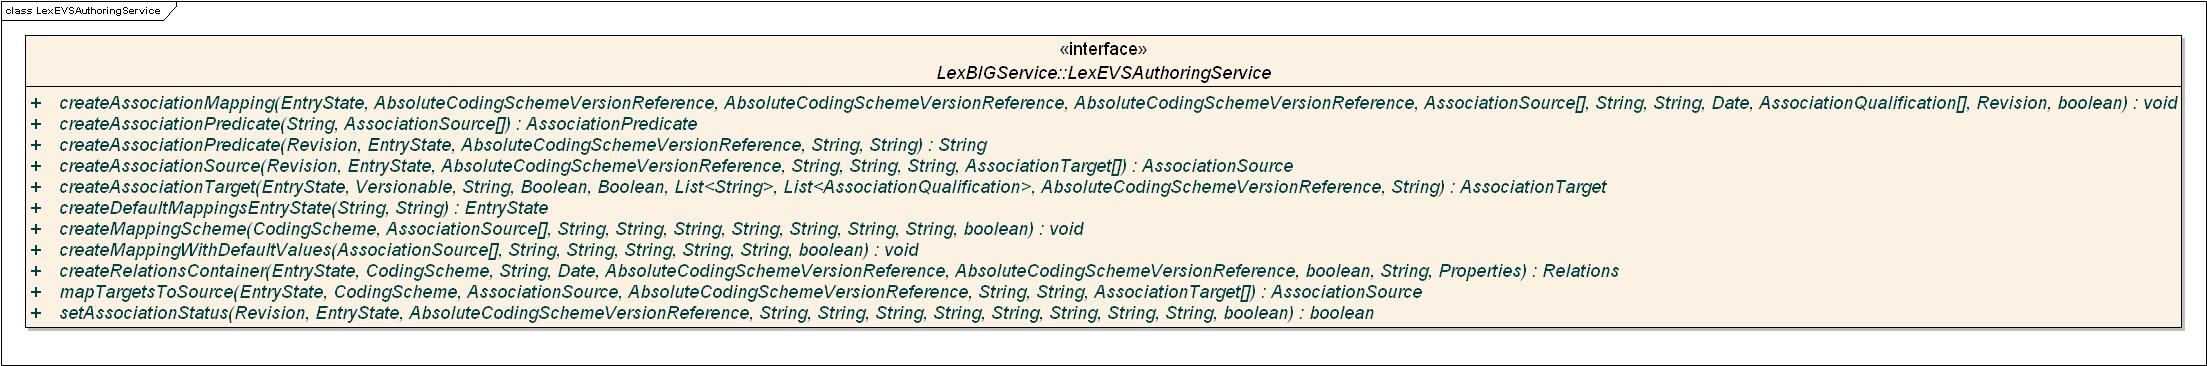 class diagram for the LexEVSAuthoringService interface